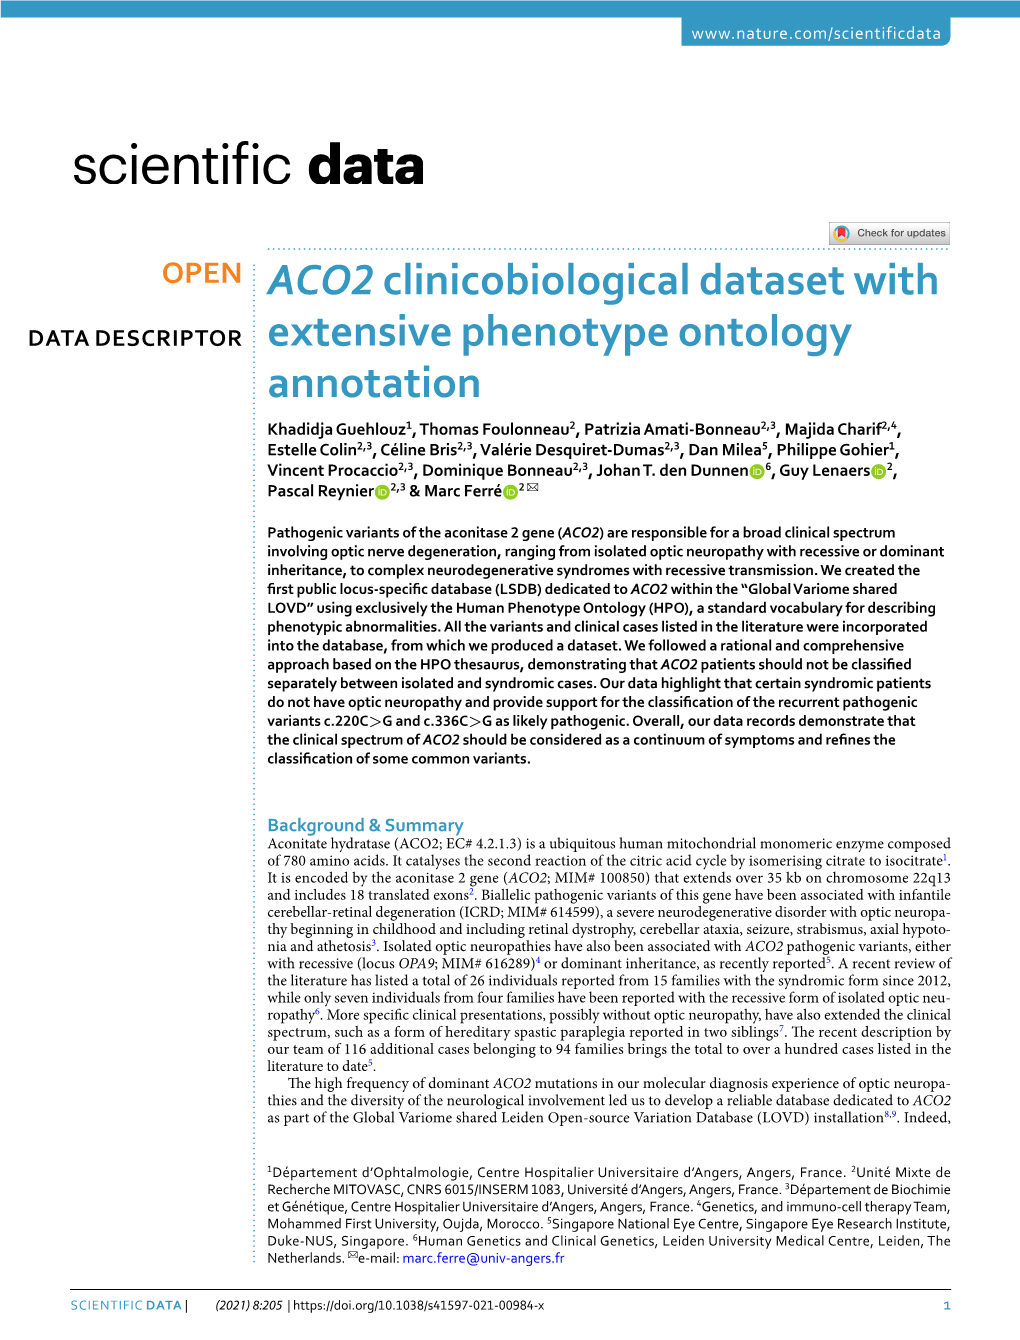 ACO2 Clinicobiological Dataset with Extensive Phenotype Ontology Annotation